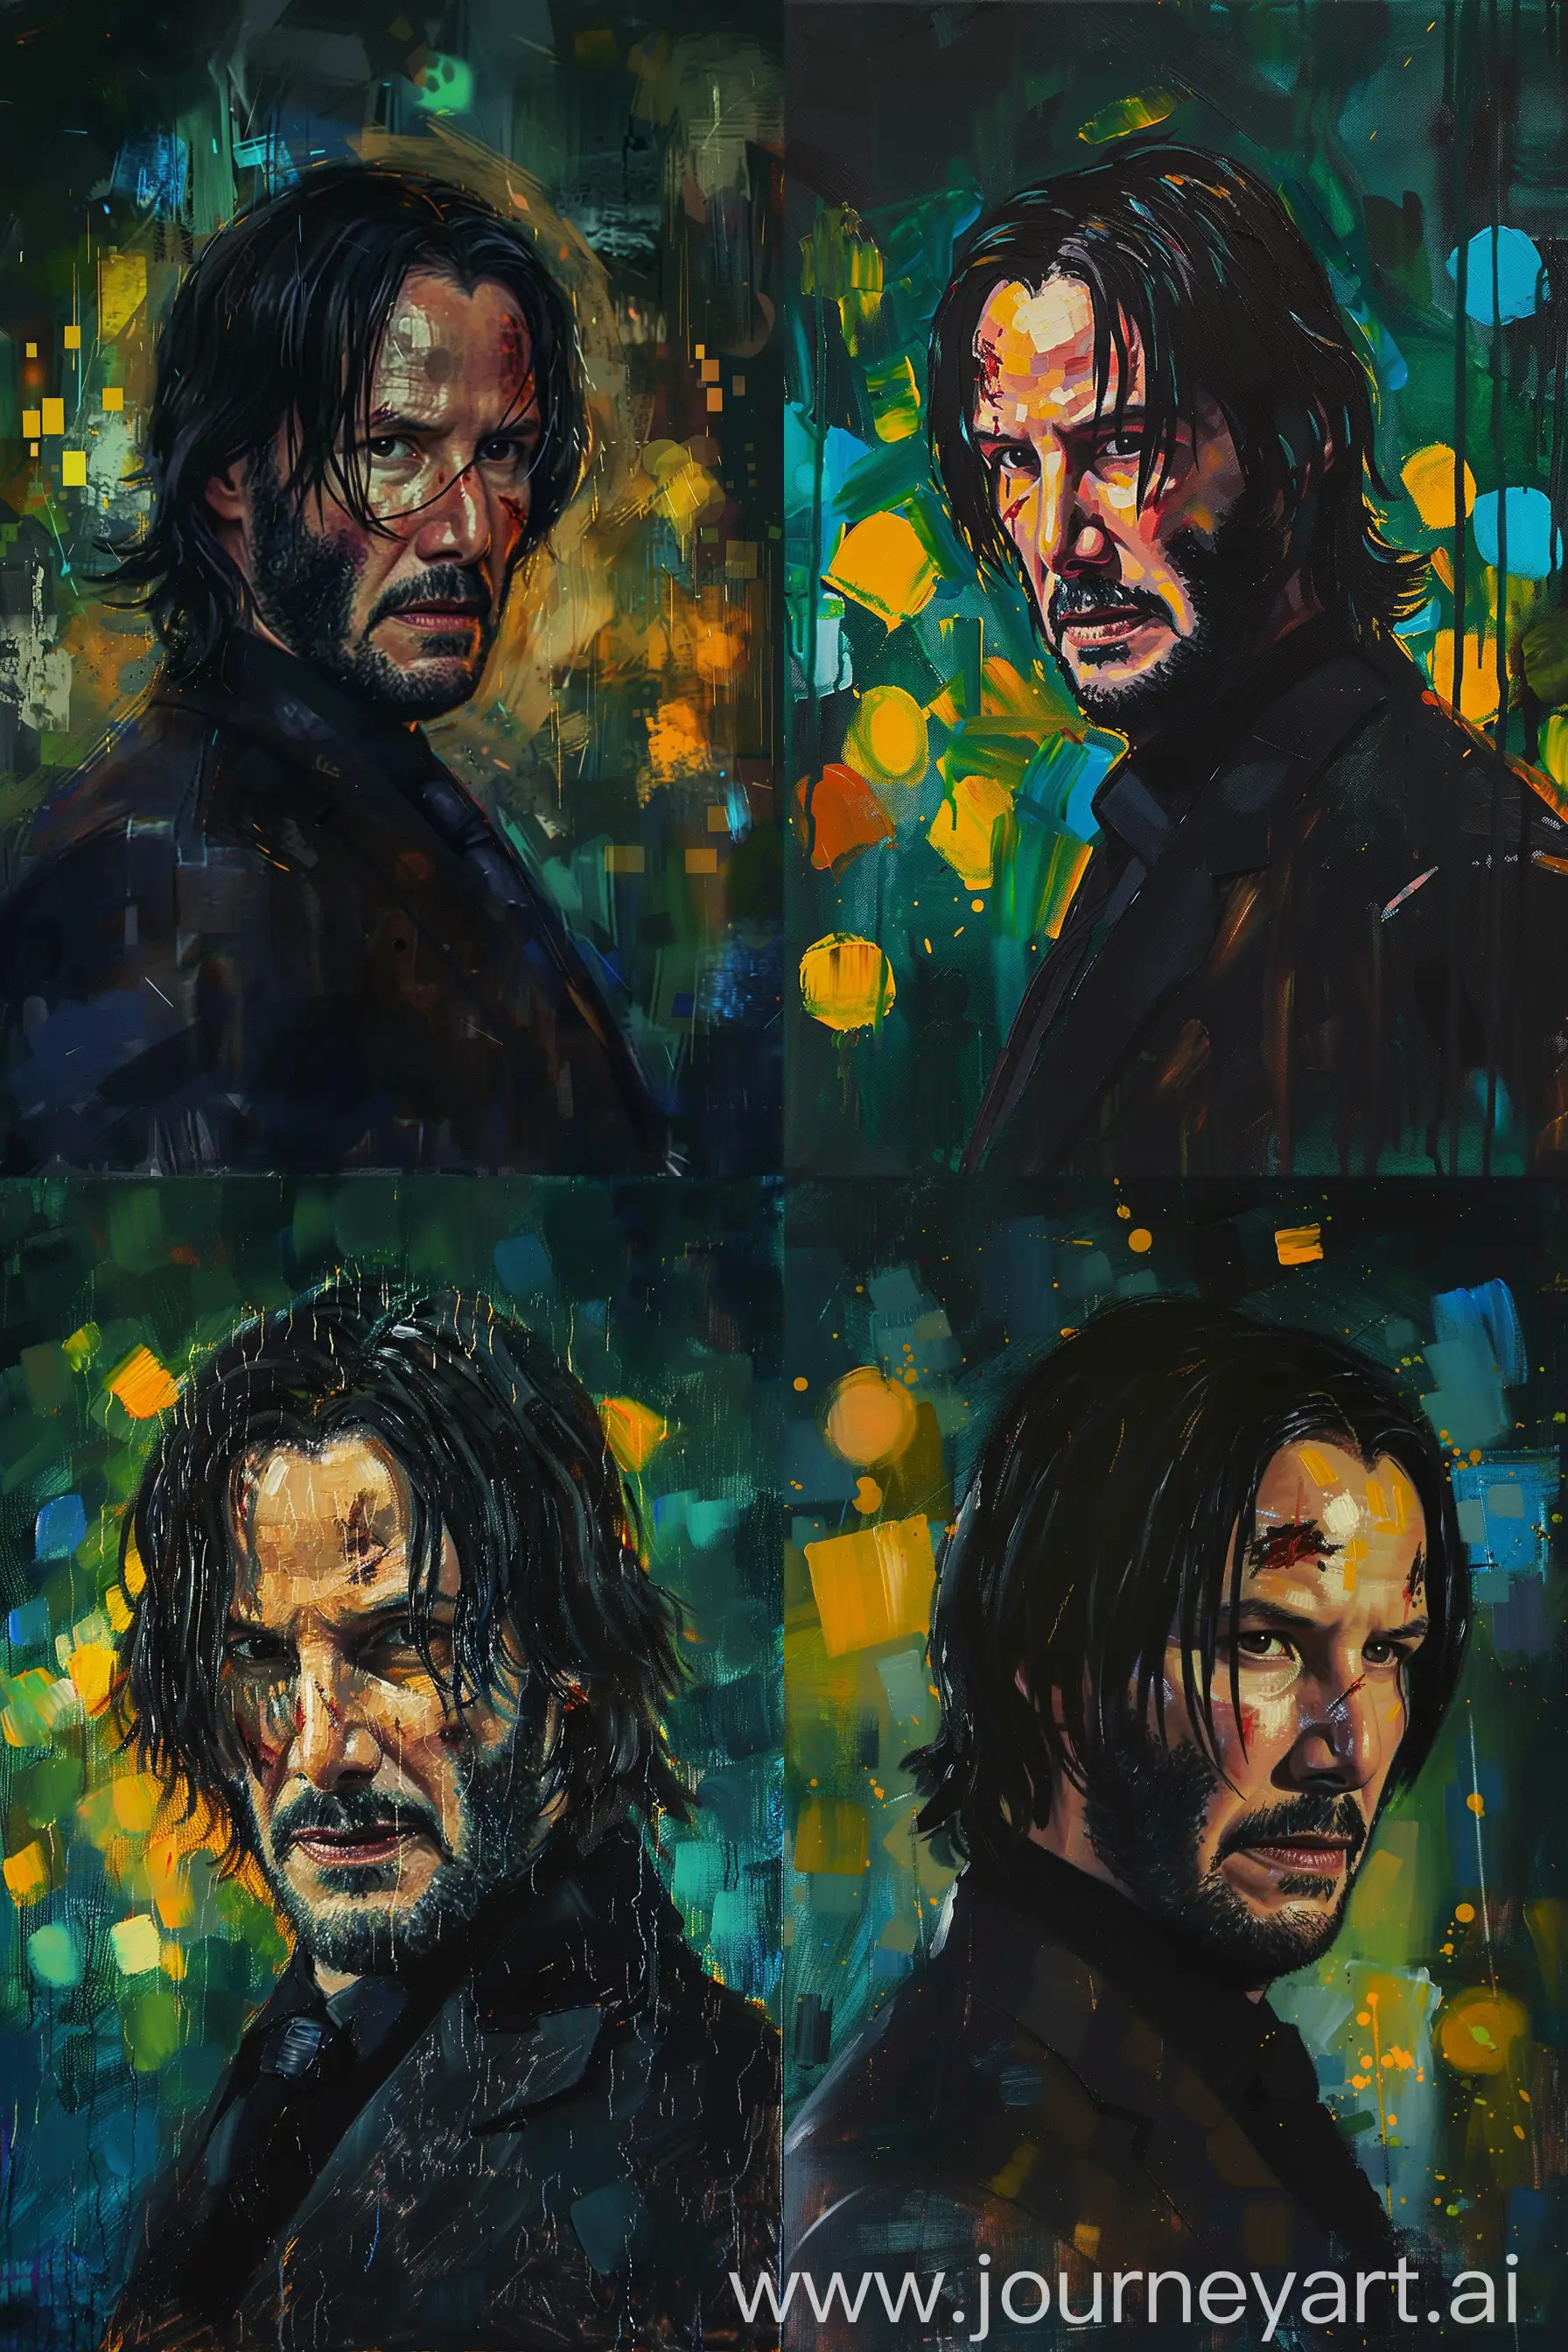 an oil painting of John Wick with deep greens, blues and yellows for the background to mimic the bokeh effect. pay attention to the texture of John wick's hair with a noticeable sheen, indicating it might be wet or styled with a glossy product. His attire is likely a dark garment with a high collar, should be depicted with the dark shades to match the dimly lit scene. the overall atmosphere should be moody and intense, focusing on the interplay of light and shadow. Additionally, include solid color blocks over the face in mustard yellow and deep brown to maintain the abstract element of the painting --ar 4:6 --c 5